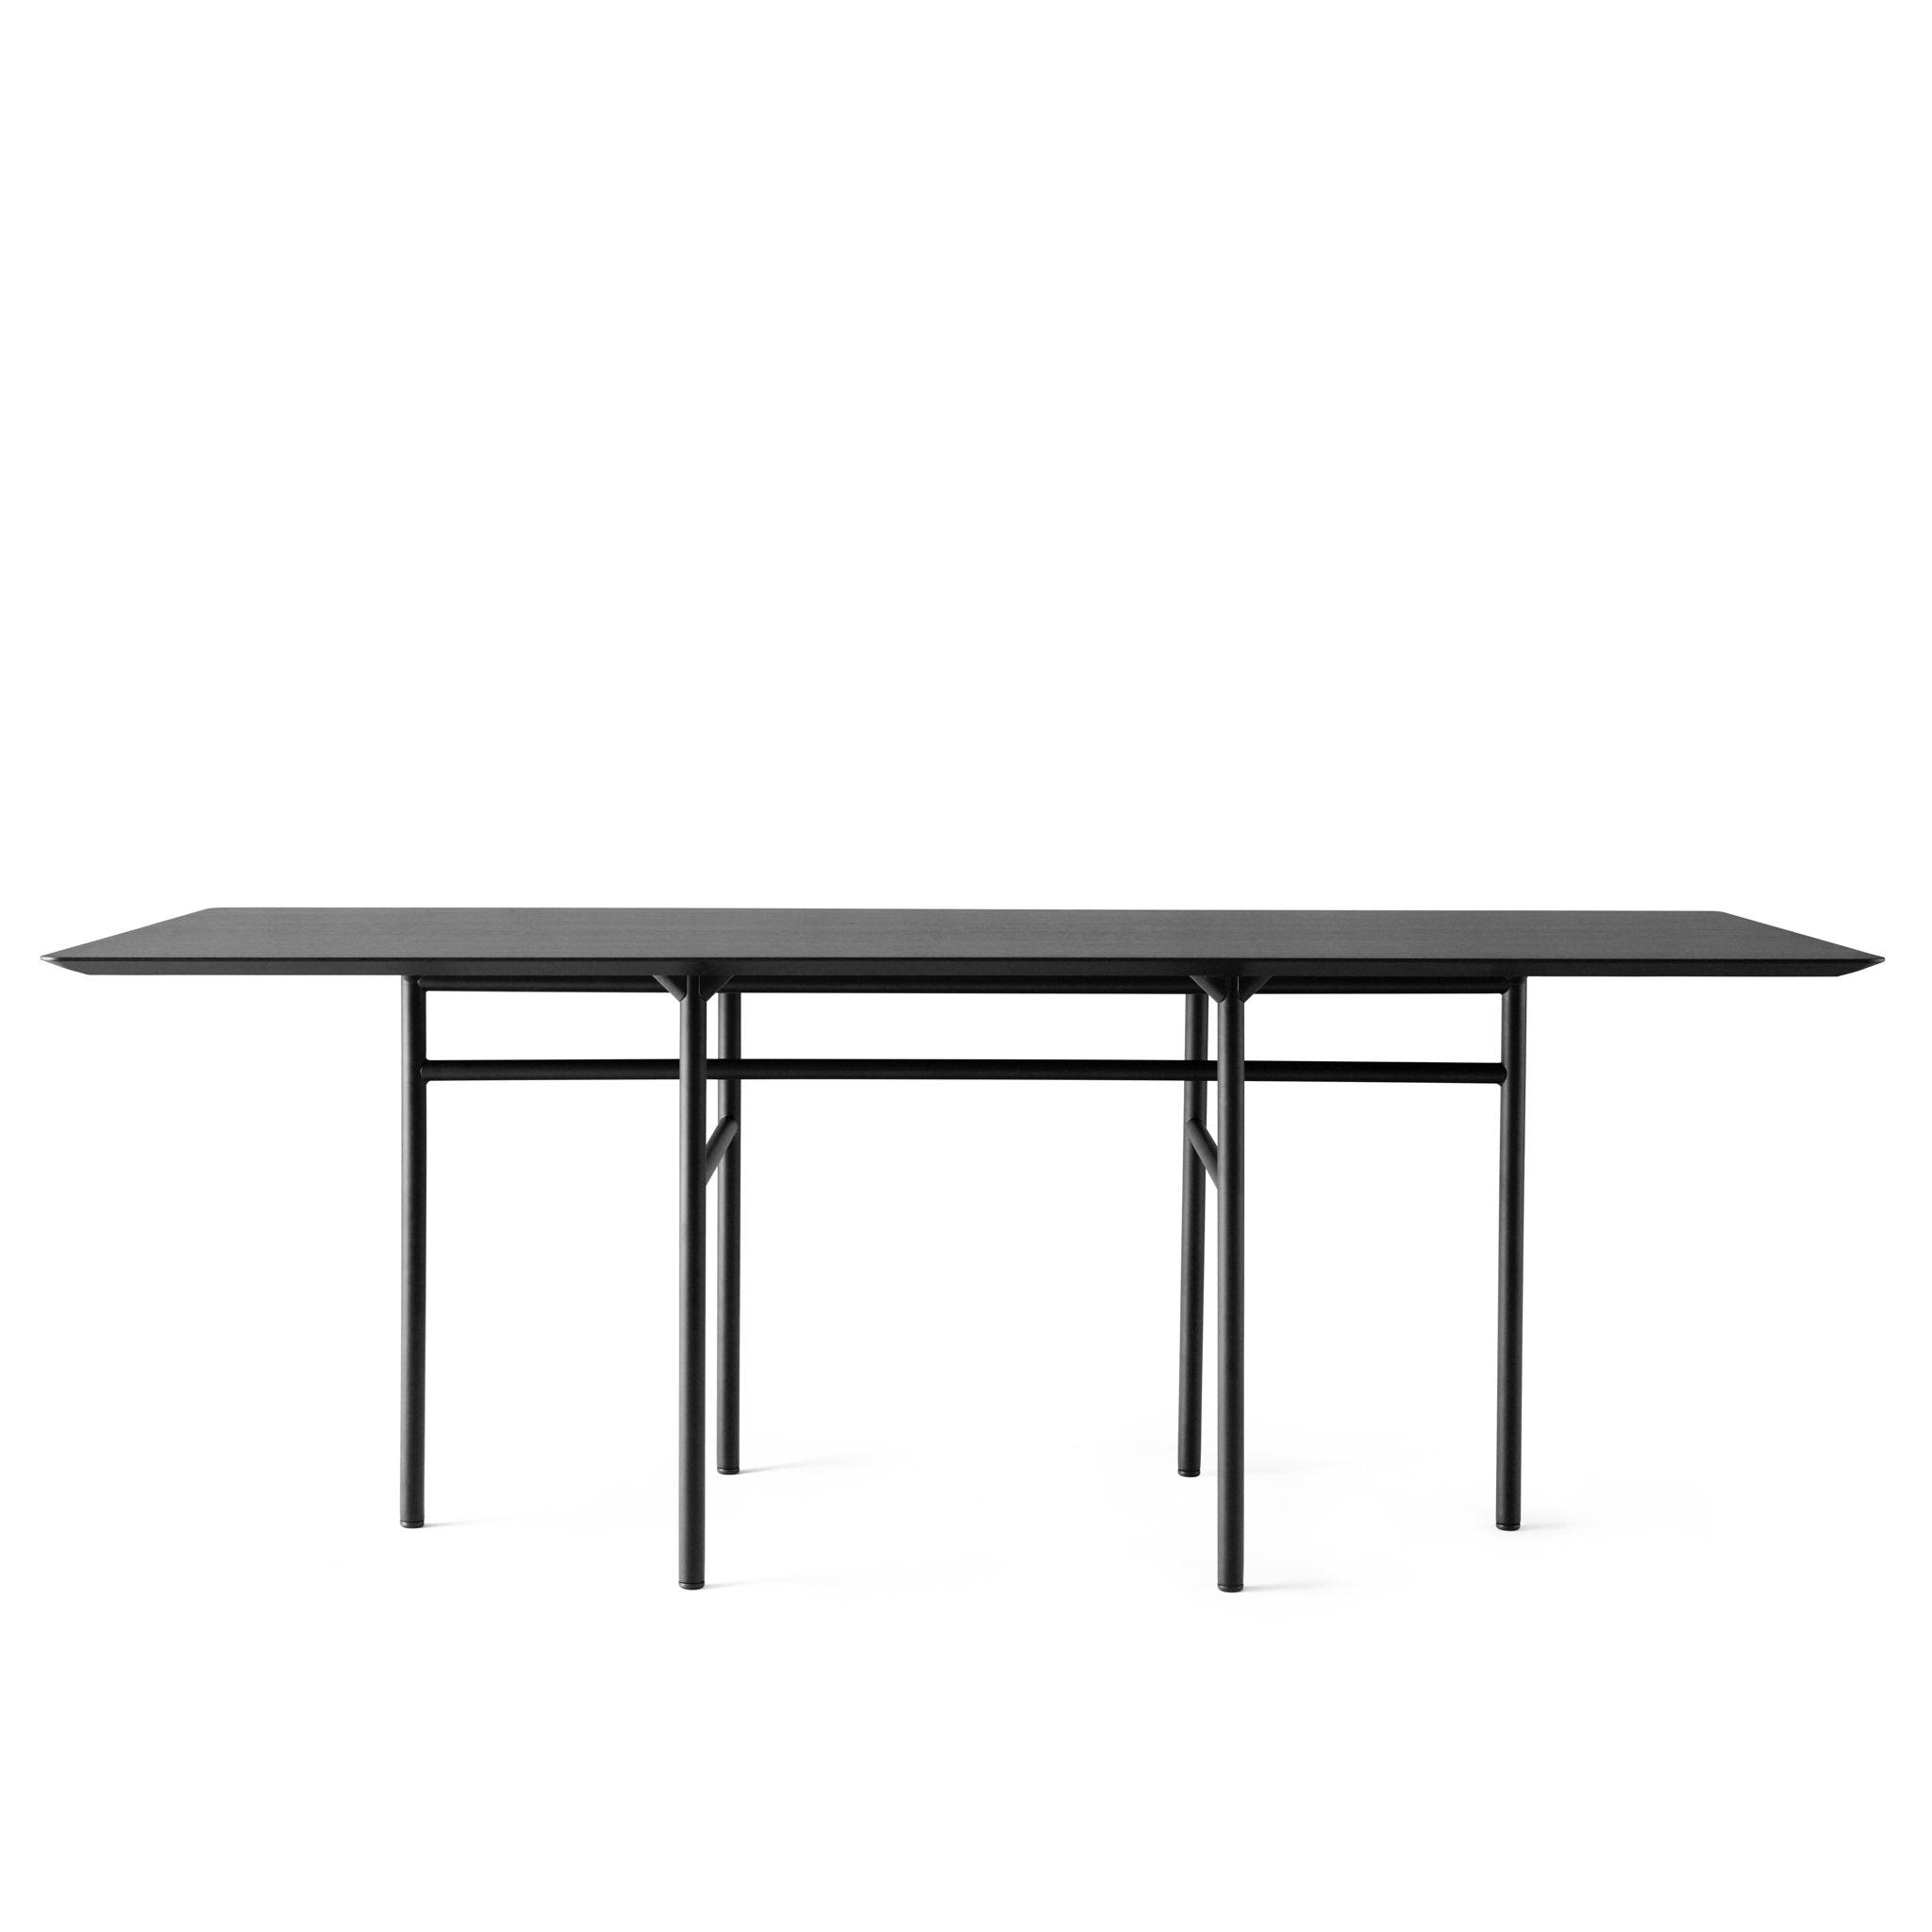 Snaregade Table Rectangular by Norm Architects